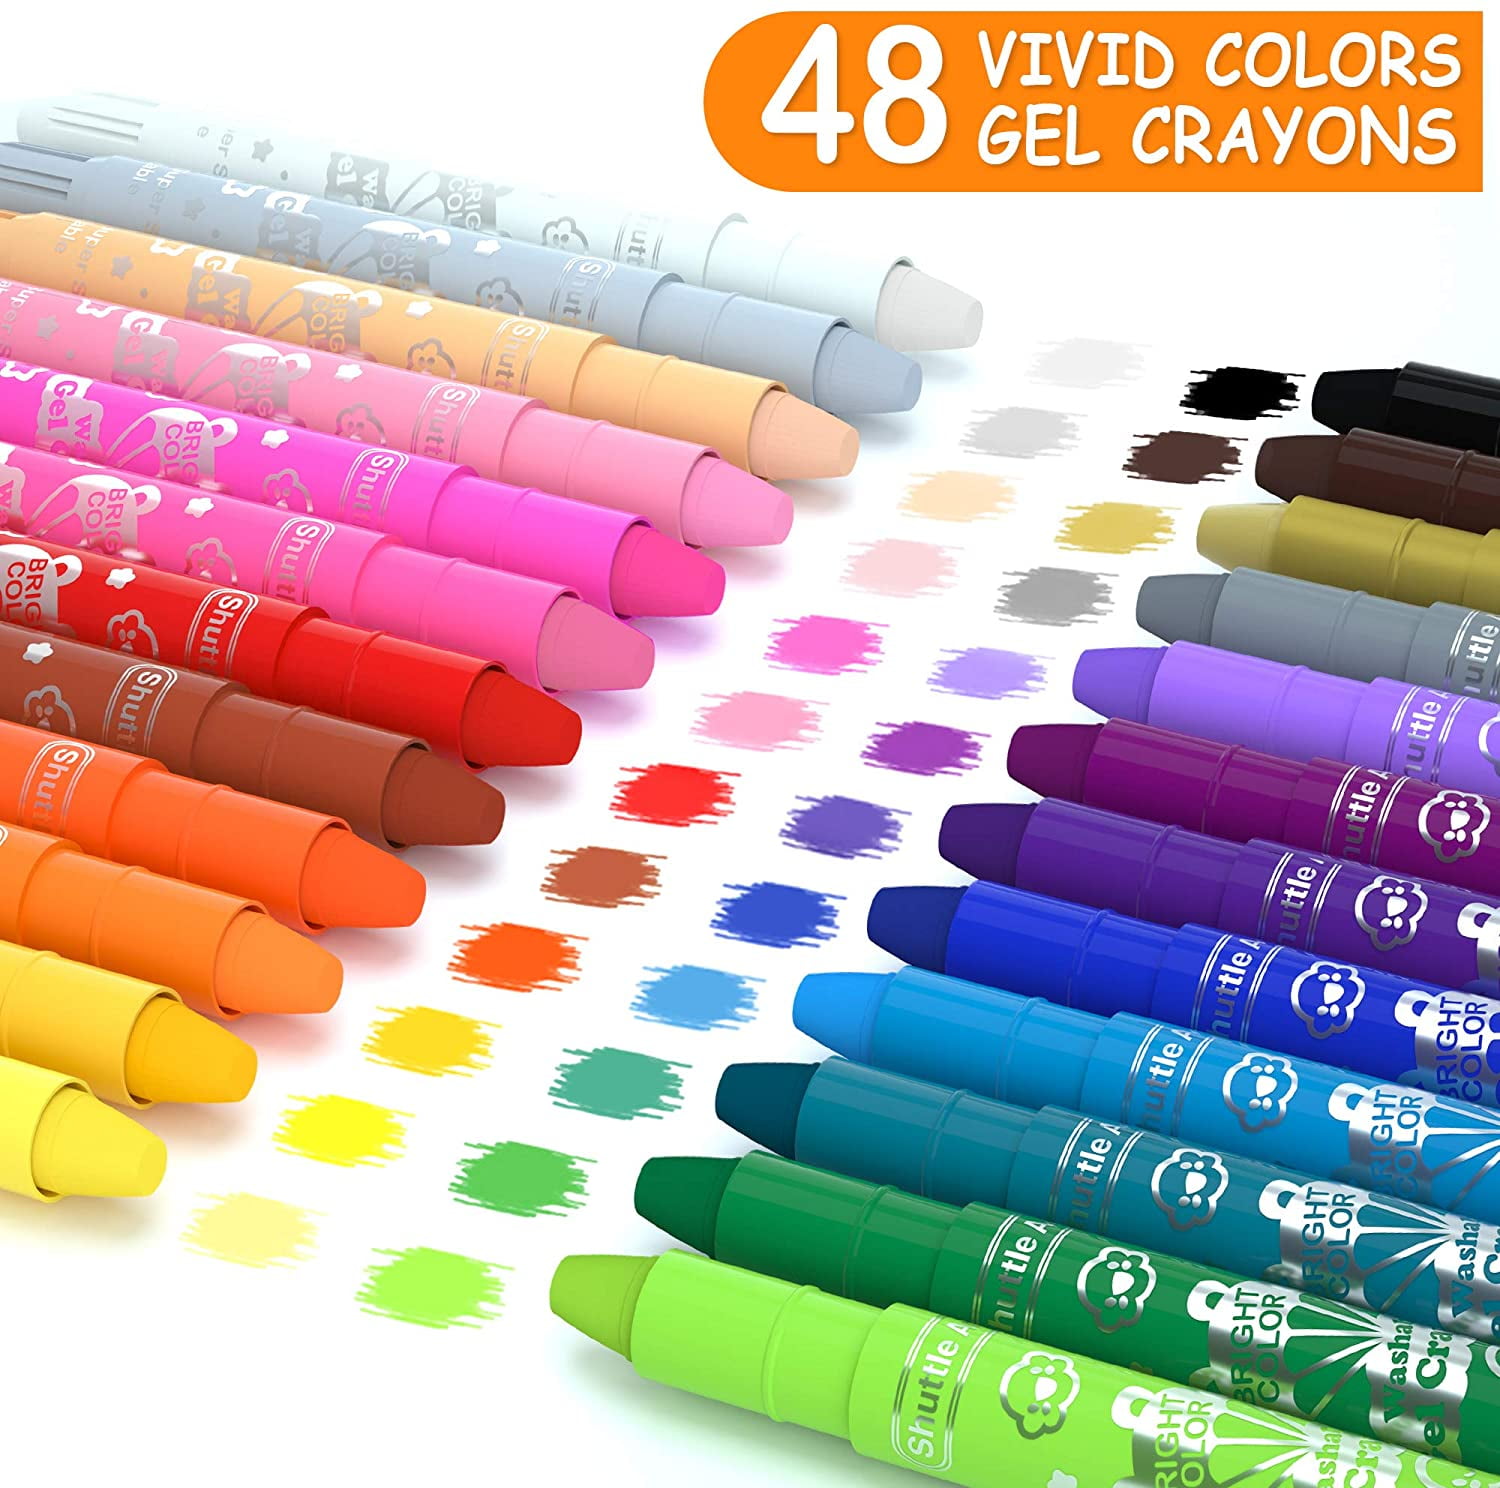 Colorful 36 Colors Crayons for Kids - Non Toxic Washable Twistable Crayons  for Children Coloring - Gel Crayon-Pastel-Watercolor Effect - Ideal for